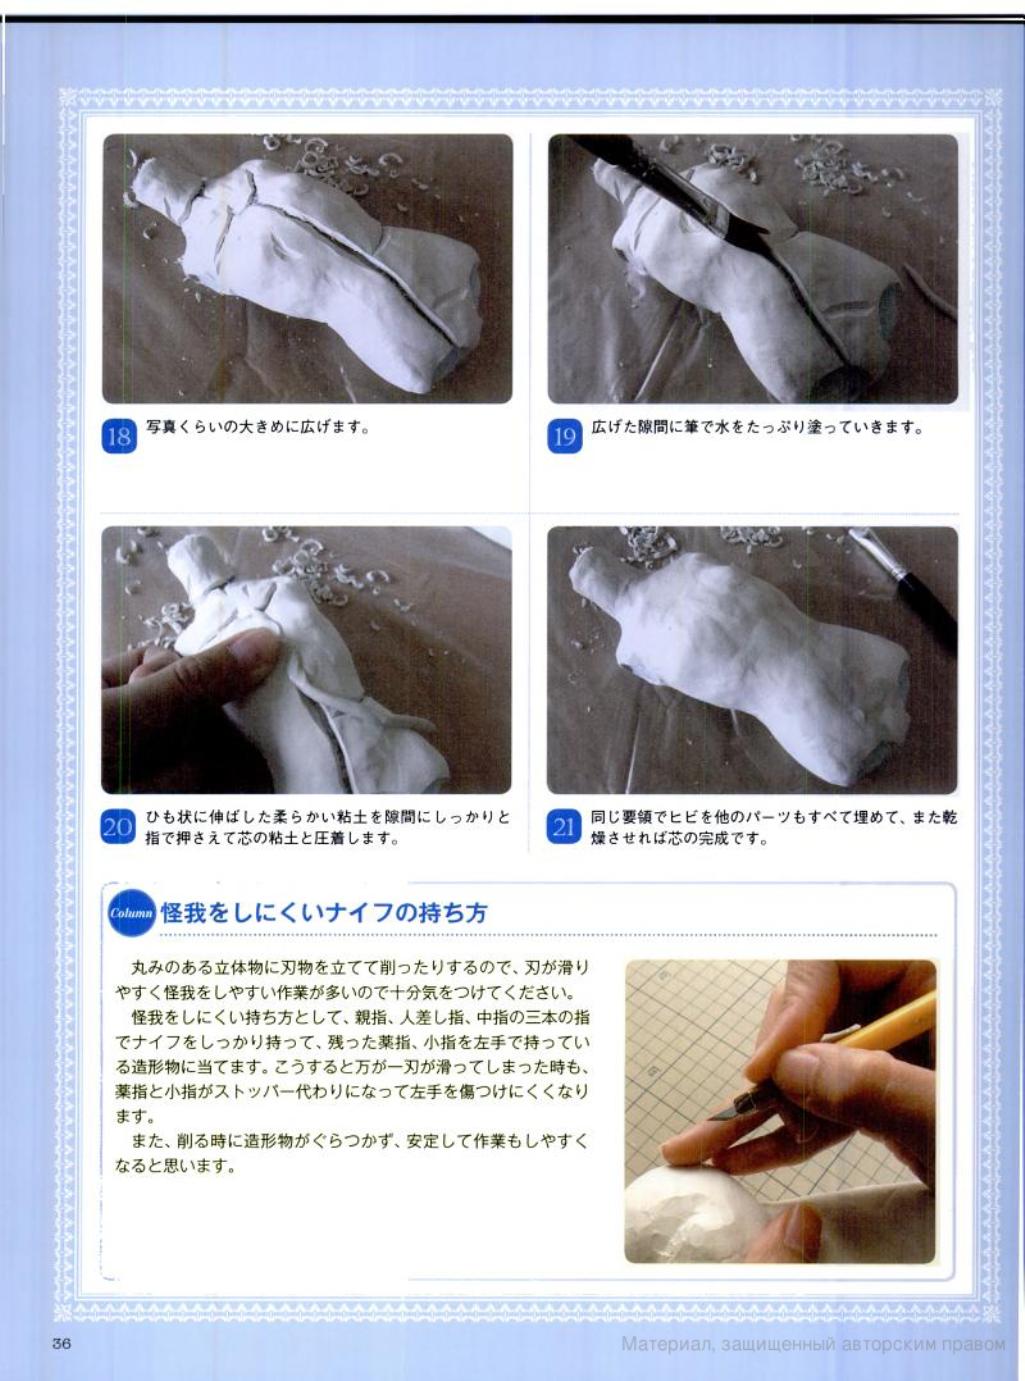 Ball Jointed Doll Making Guide